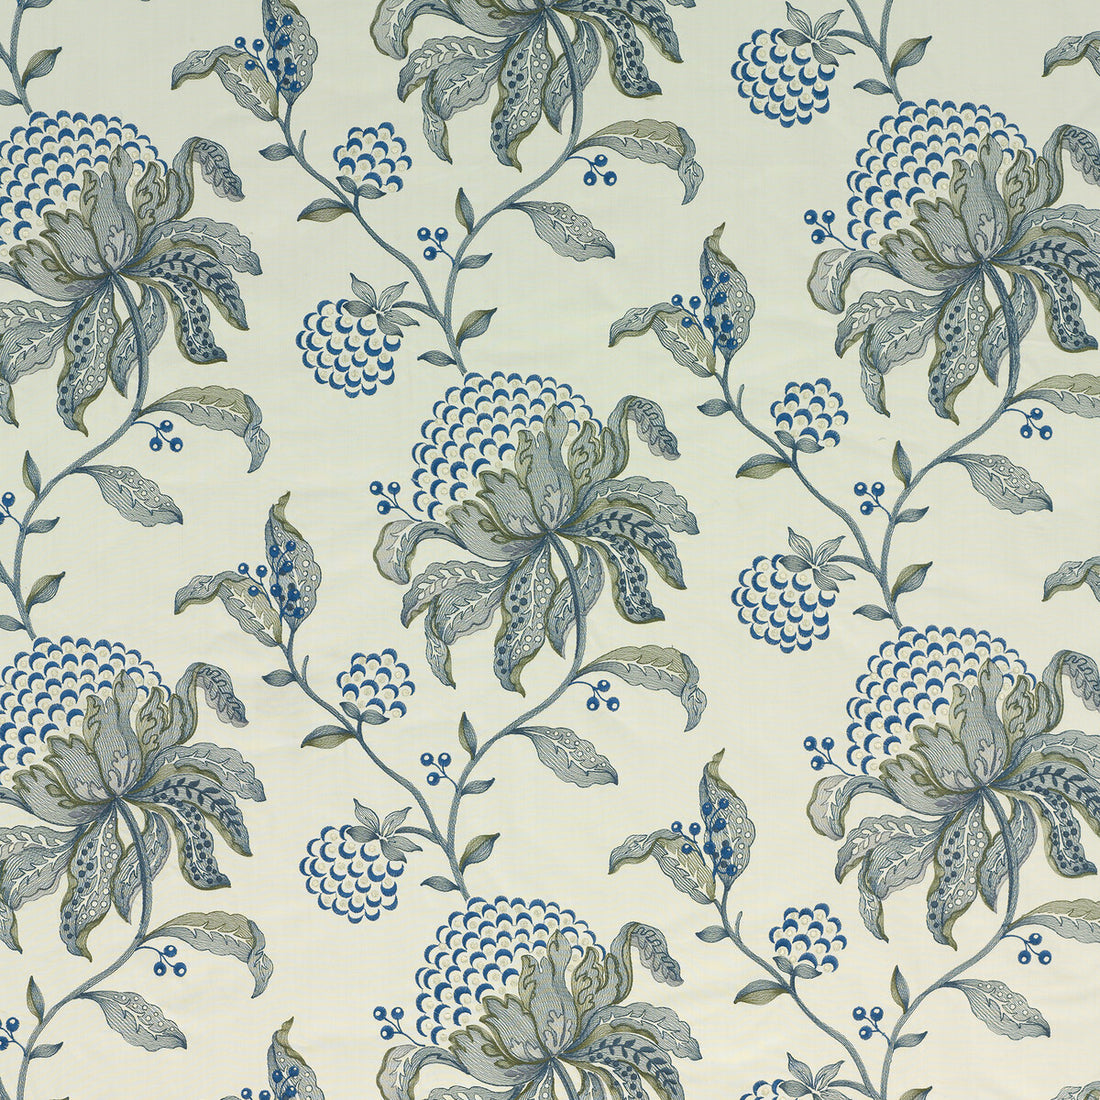 Silwood fabric in indigo color - pattern BF10501.1.0 - by G P &amp; J Baker in the Larkhill collection